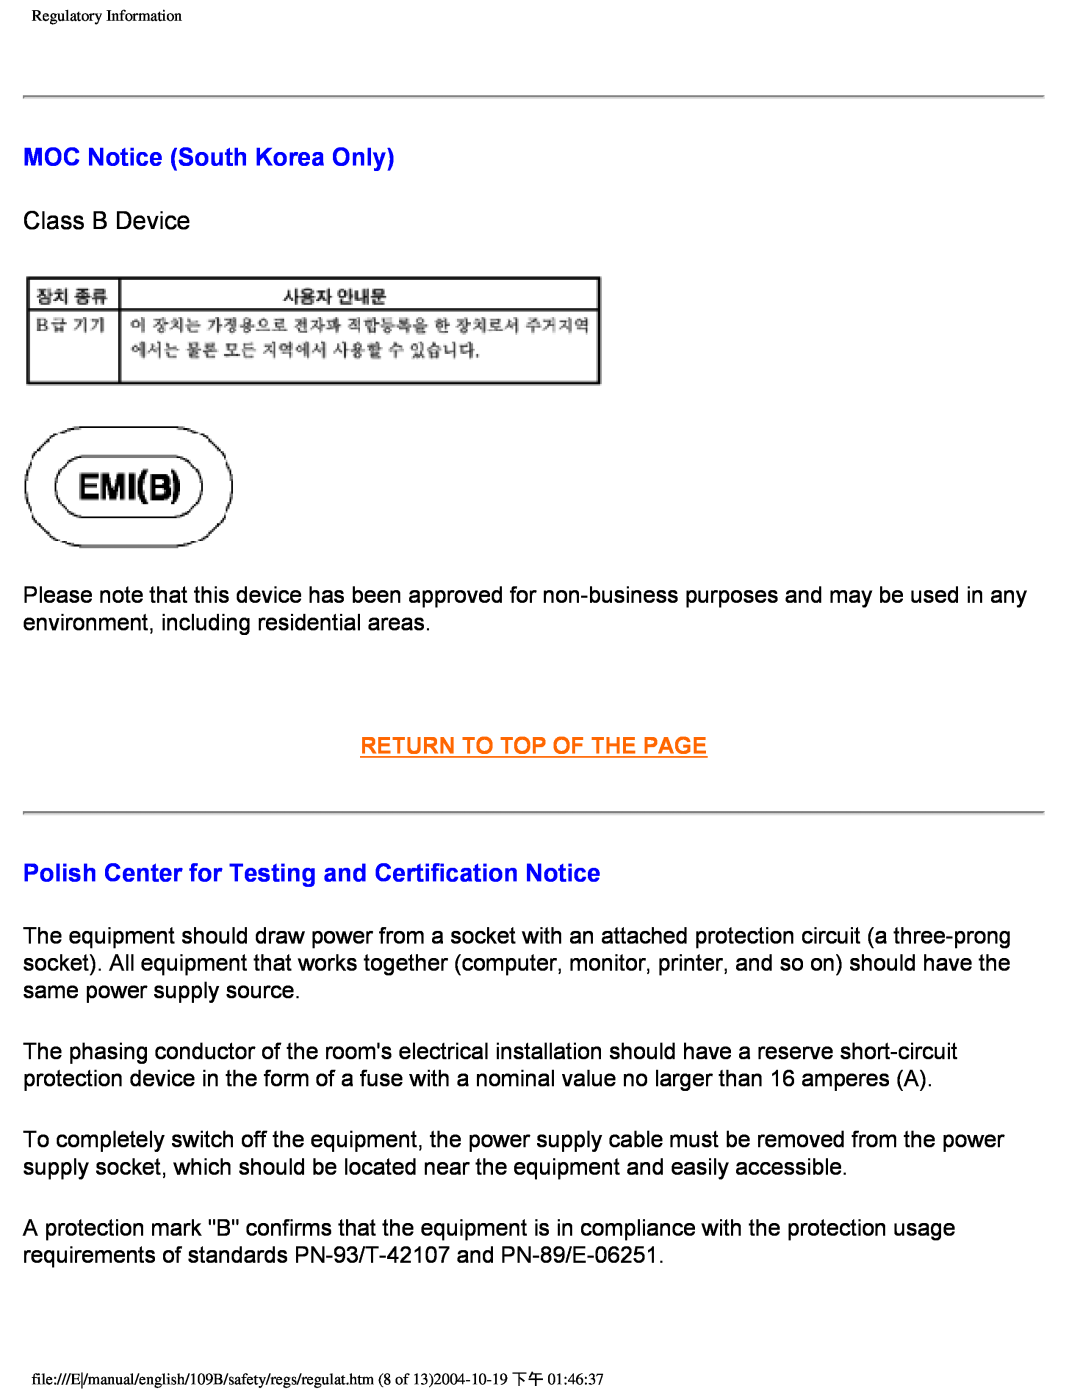 Philips 109B user manual MOC Notice South Korea Only, Polish Center for Testing and Certification Notice, Class B Device 